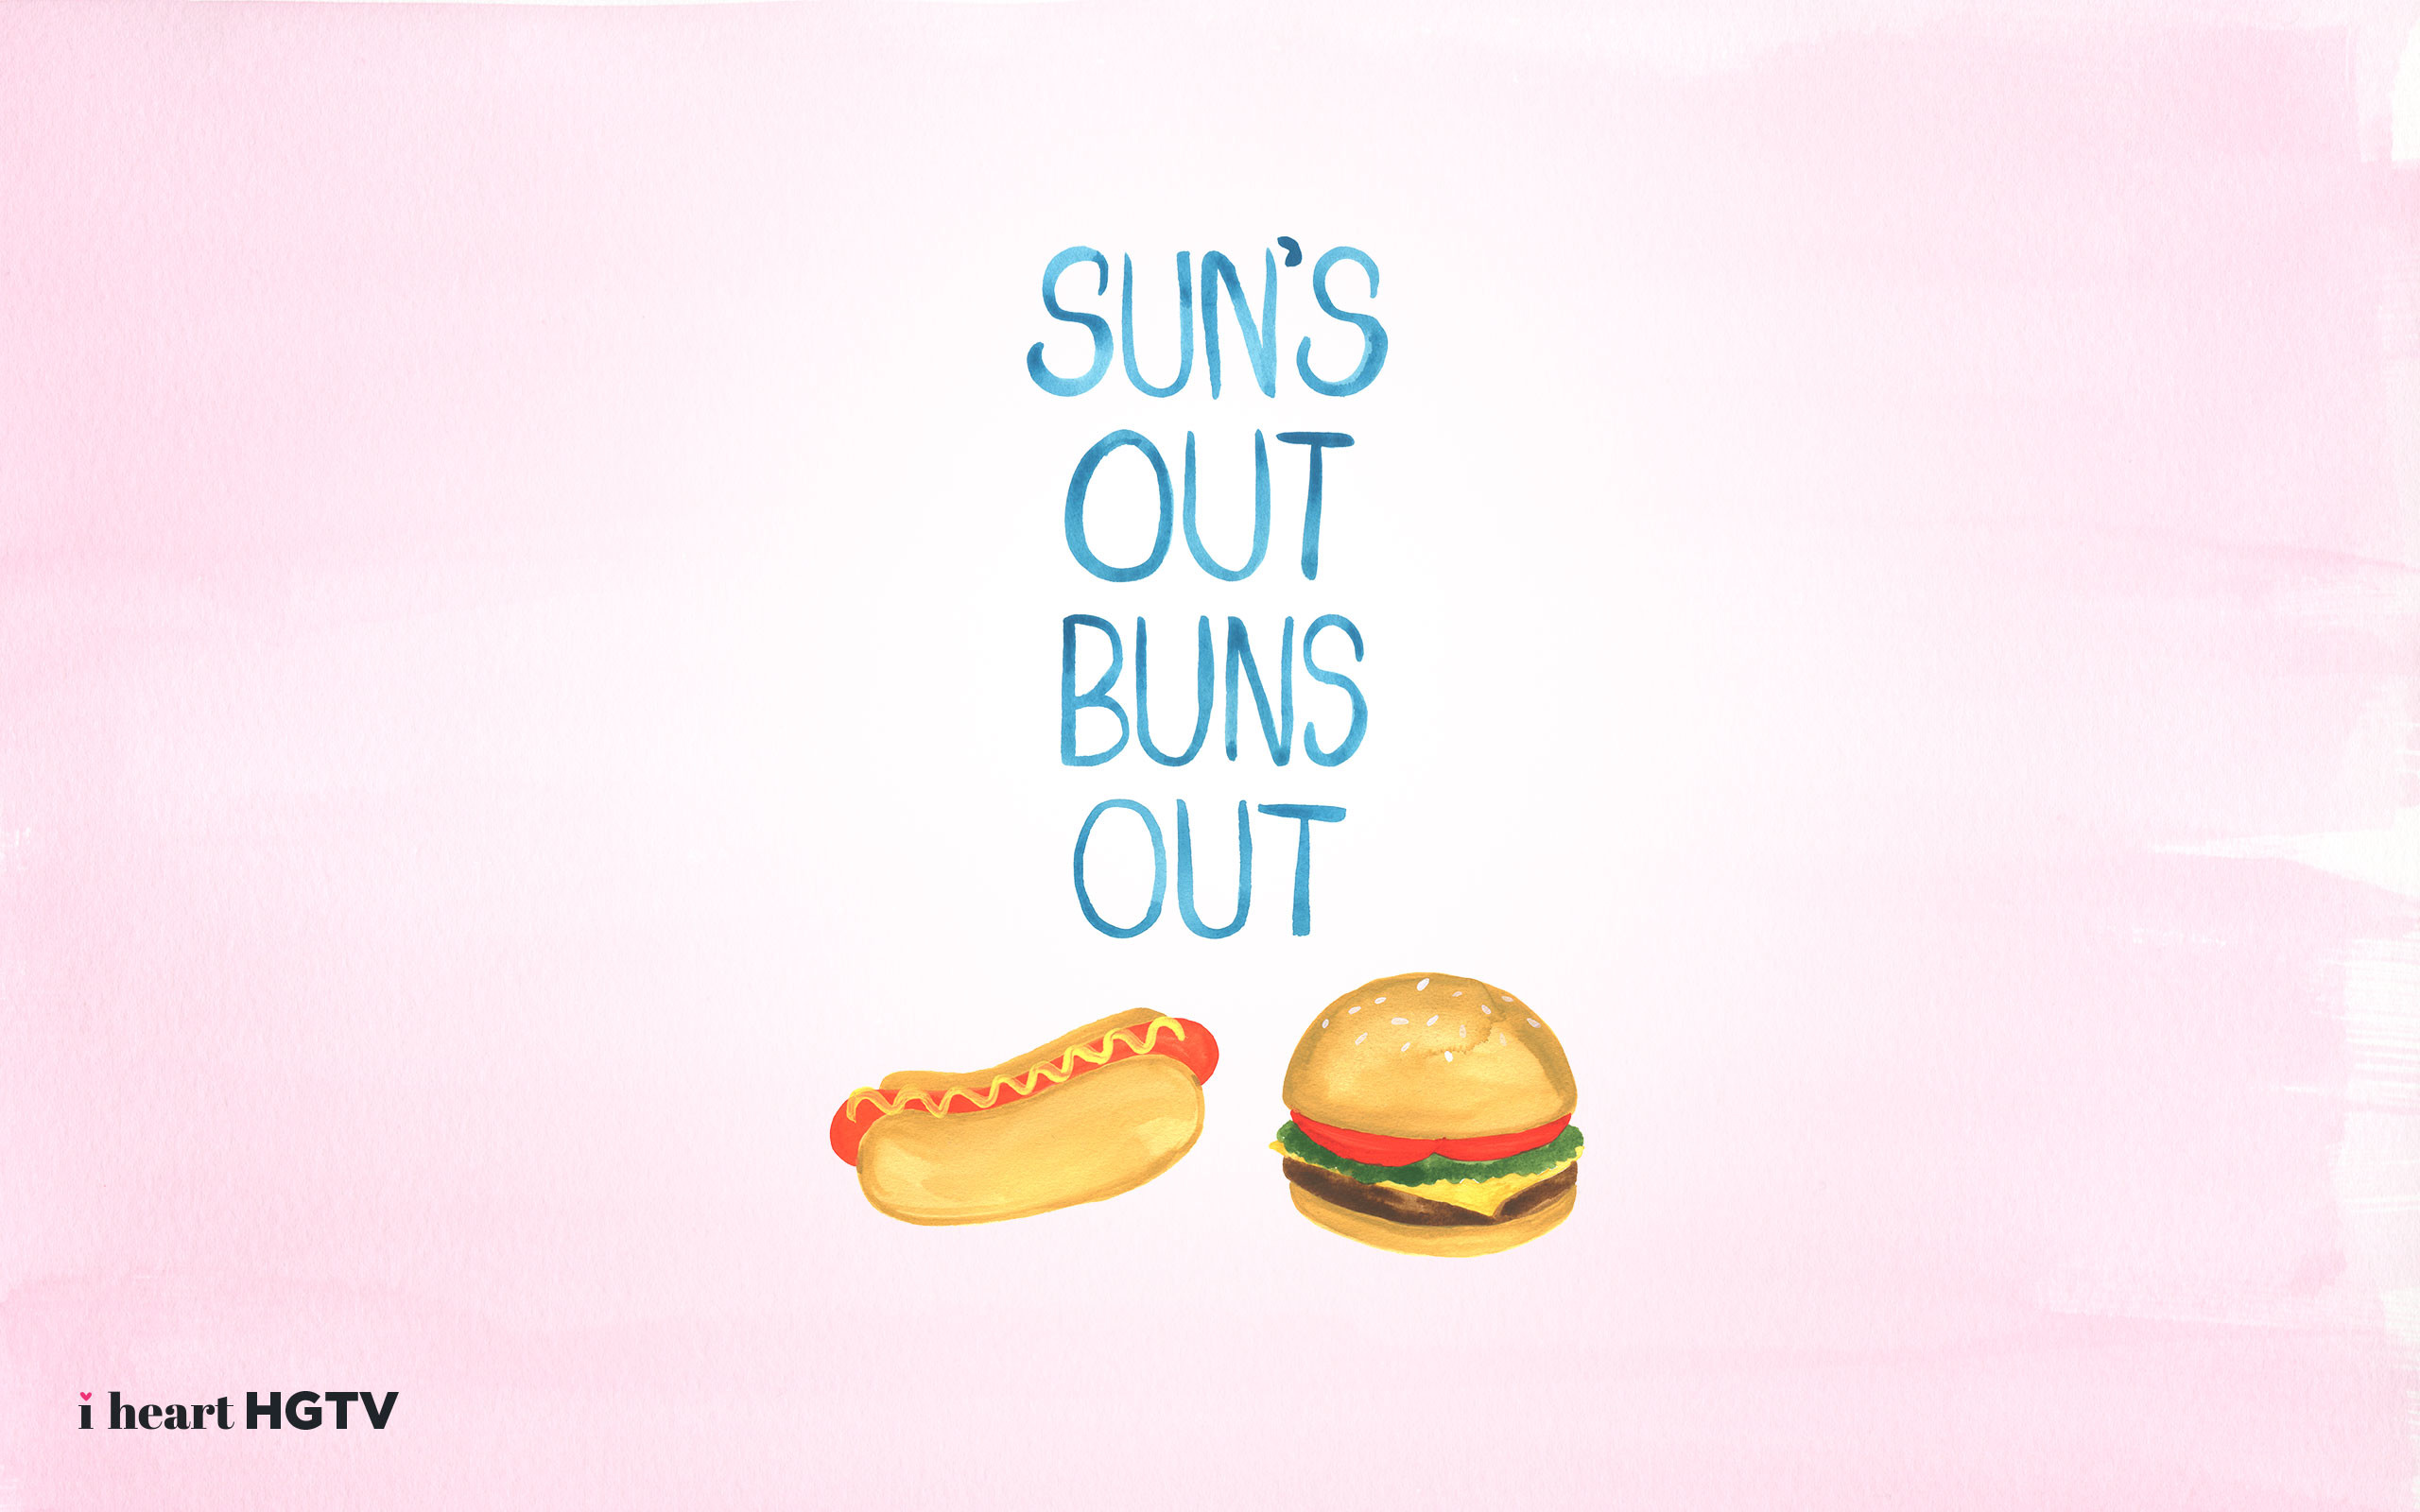 2560x1600 Download the SUN'S OUT BUNS OUT wallpaper for your desktop.